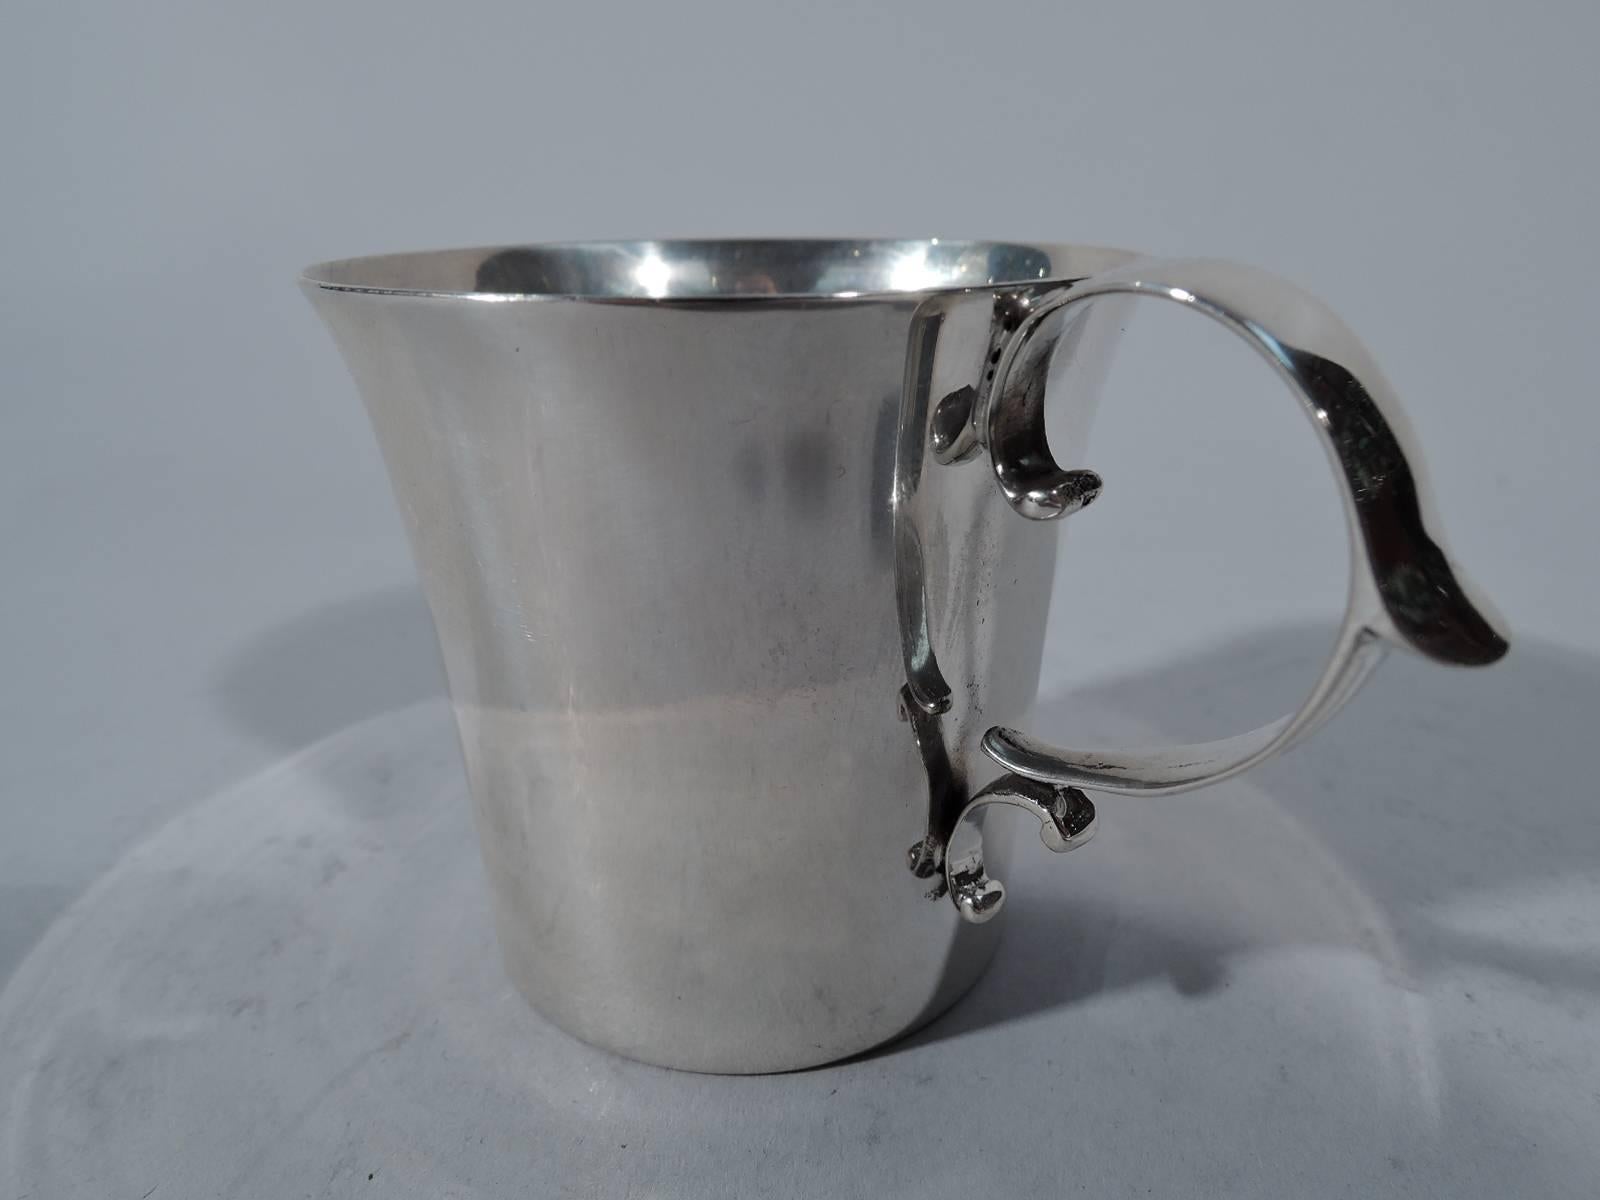 Neat and elegant sterling silver baby cup. Made by Gorham in Providence in 1919. Flared rim and capped double-scroll handle. Lots of room for engraving. Hallmark includes date symbol and no. 3284A. Fine condition.

Diminutive dimensions: H 2 1/4 x